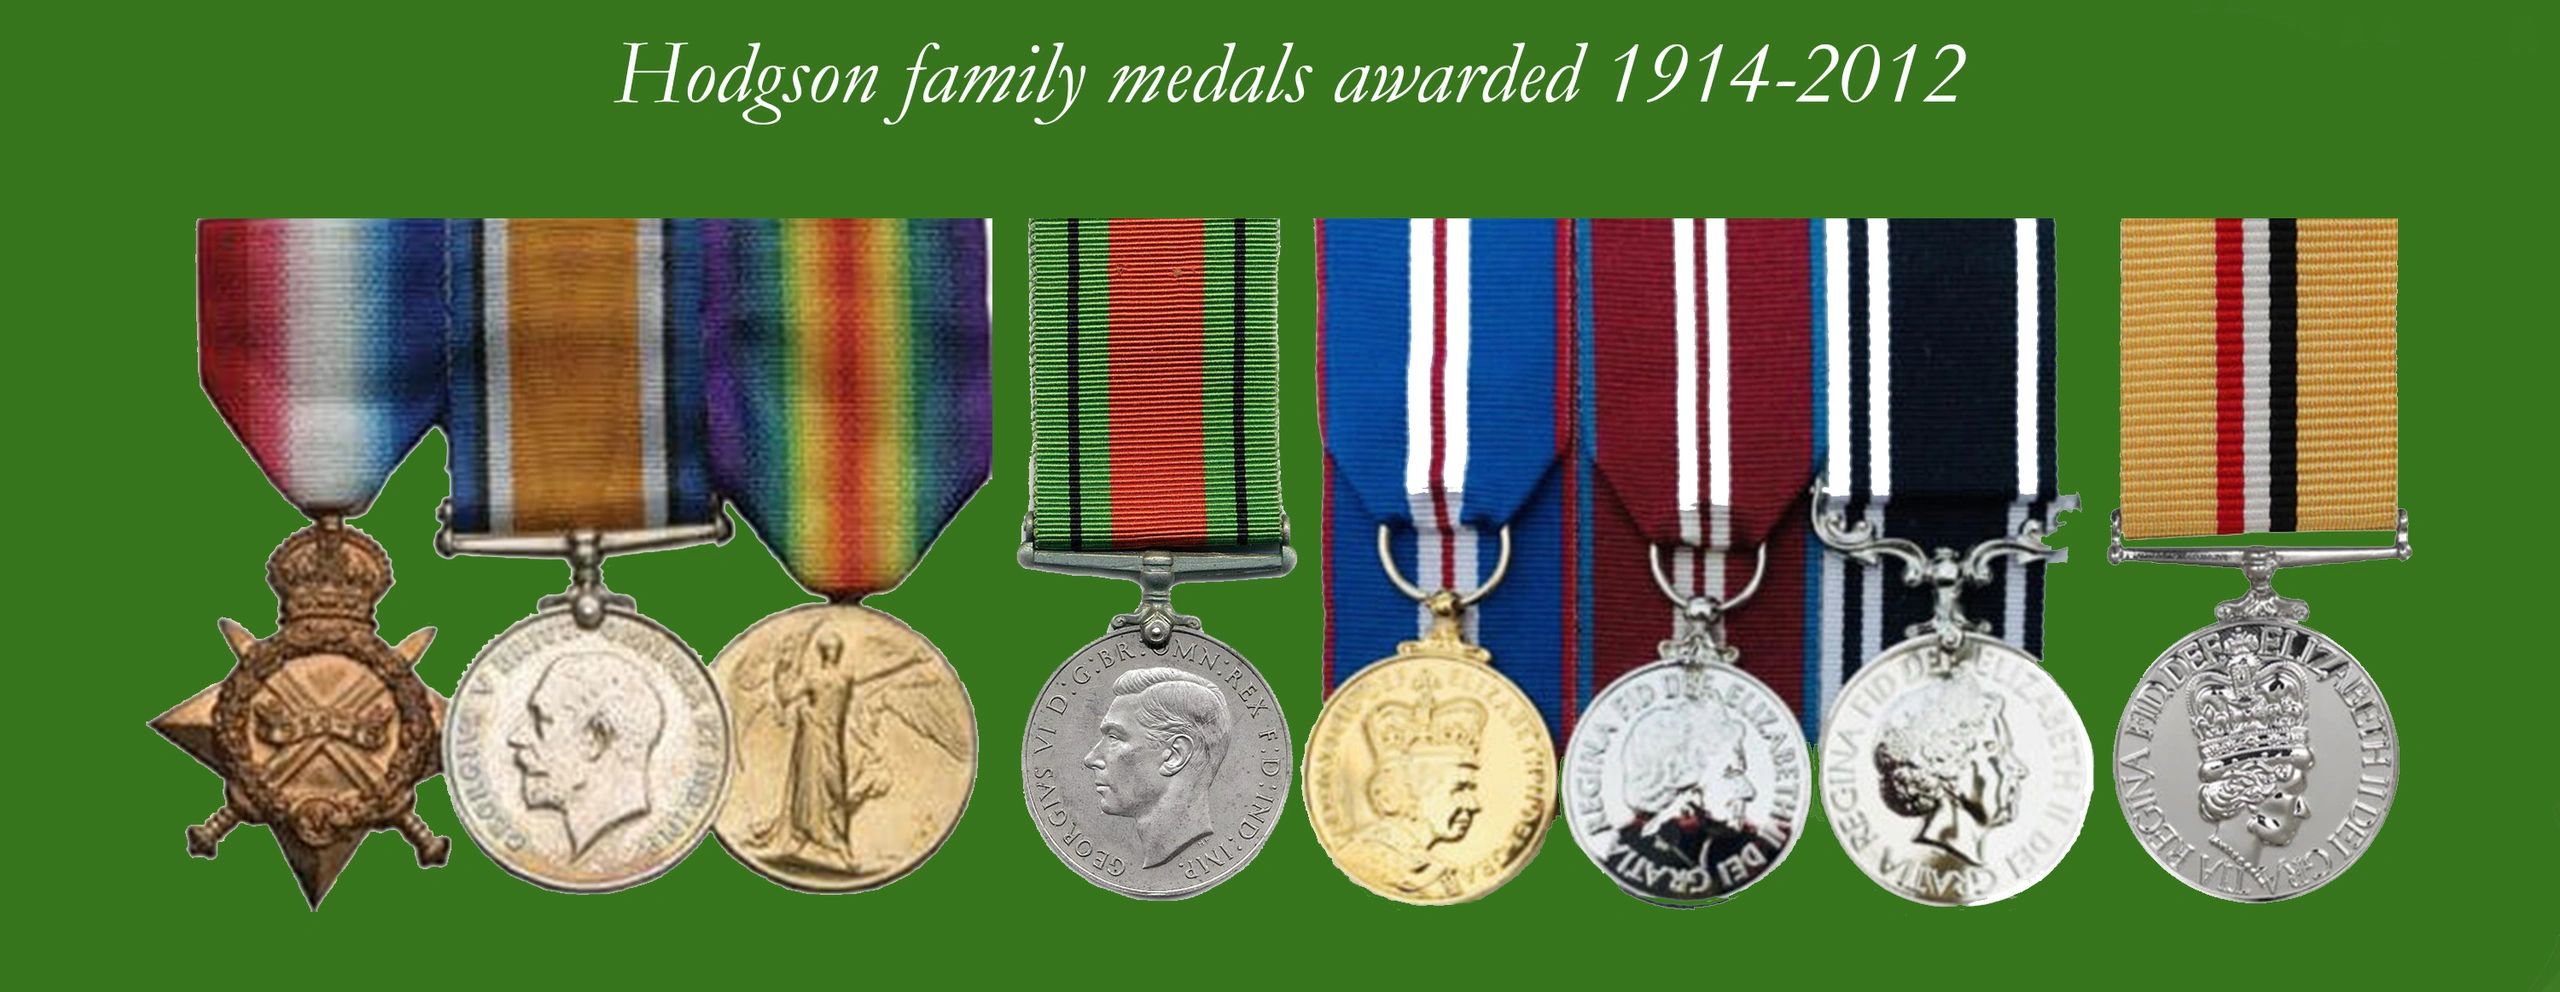 Family medals awarded 